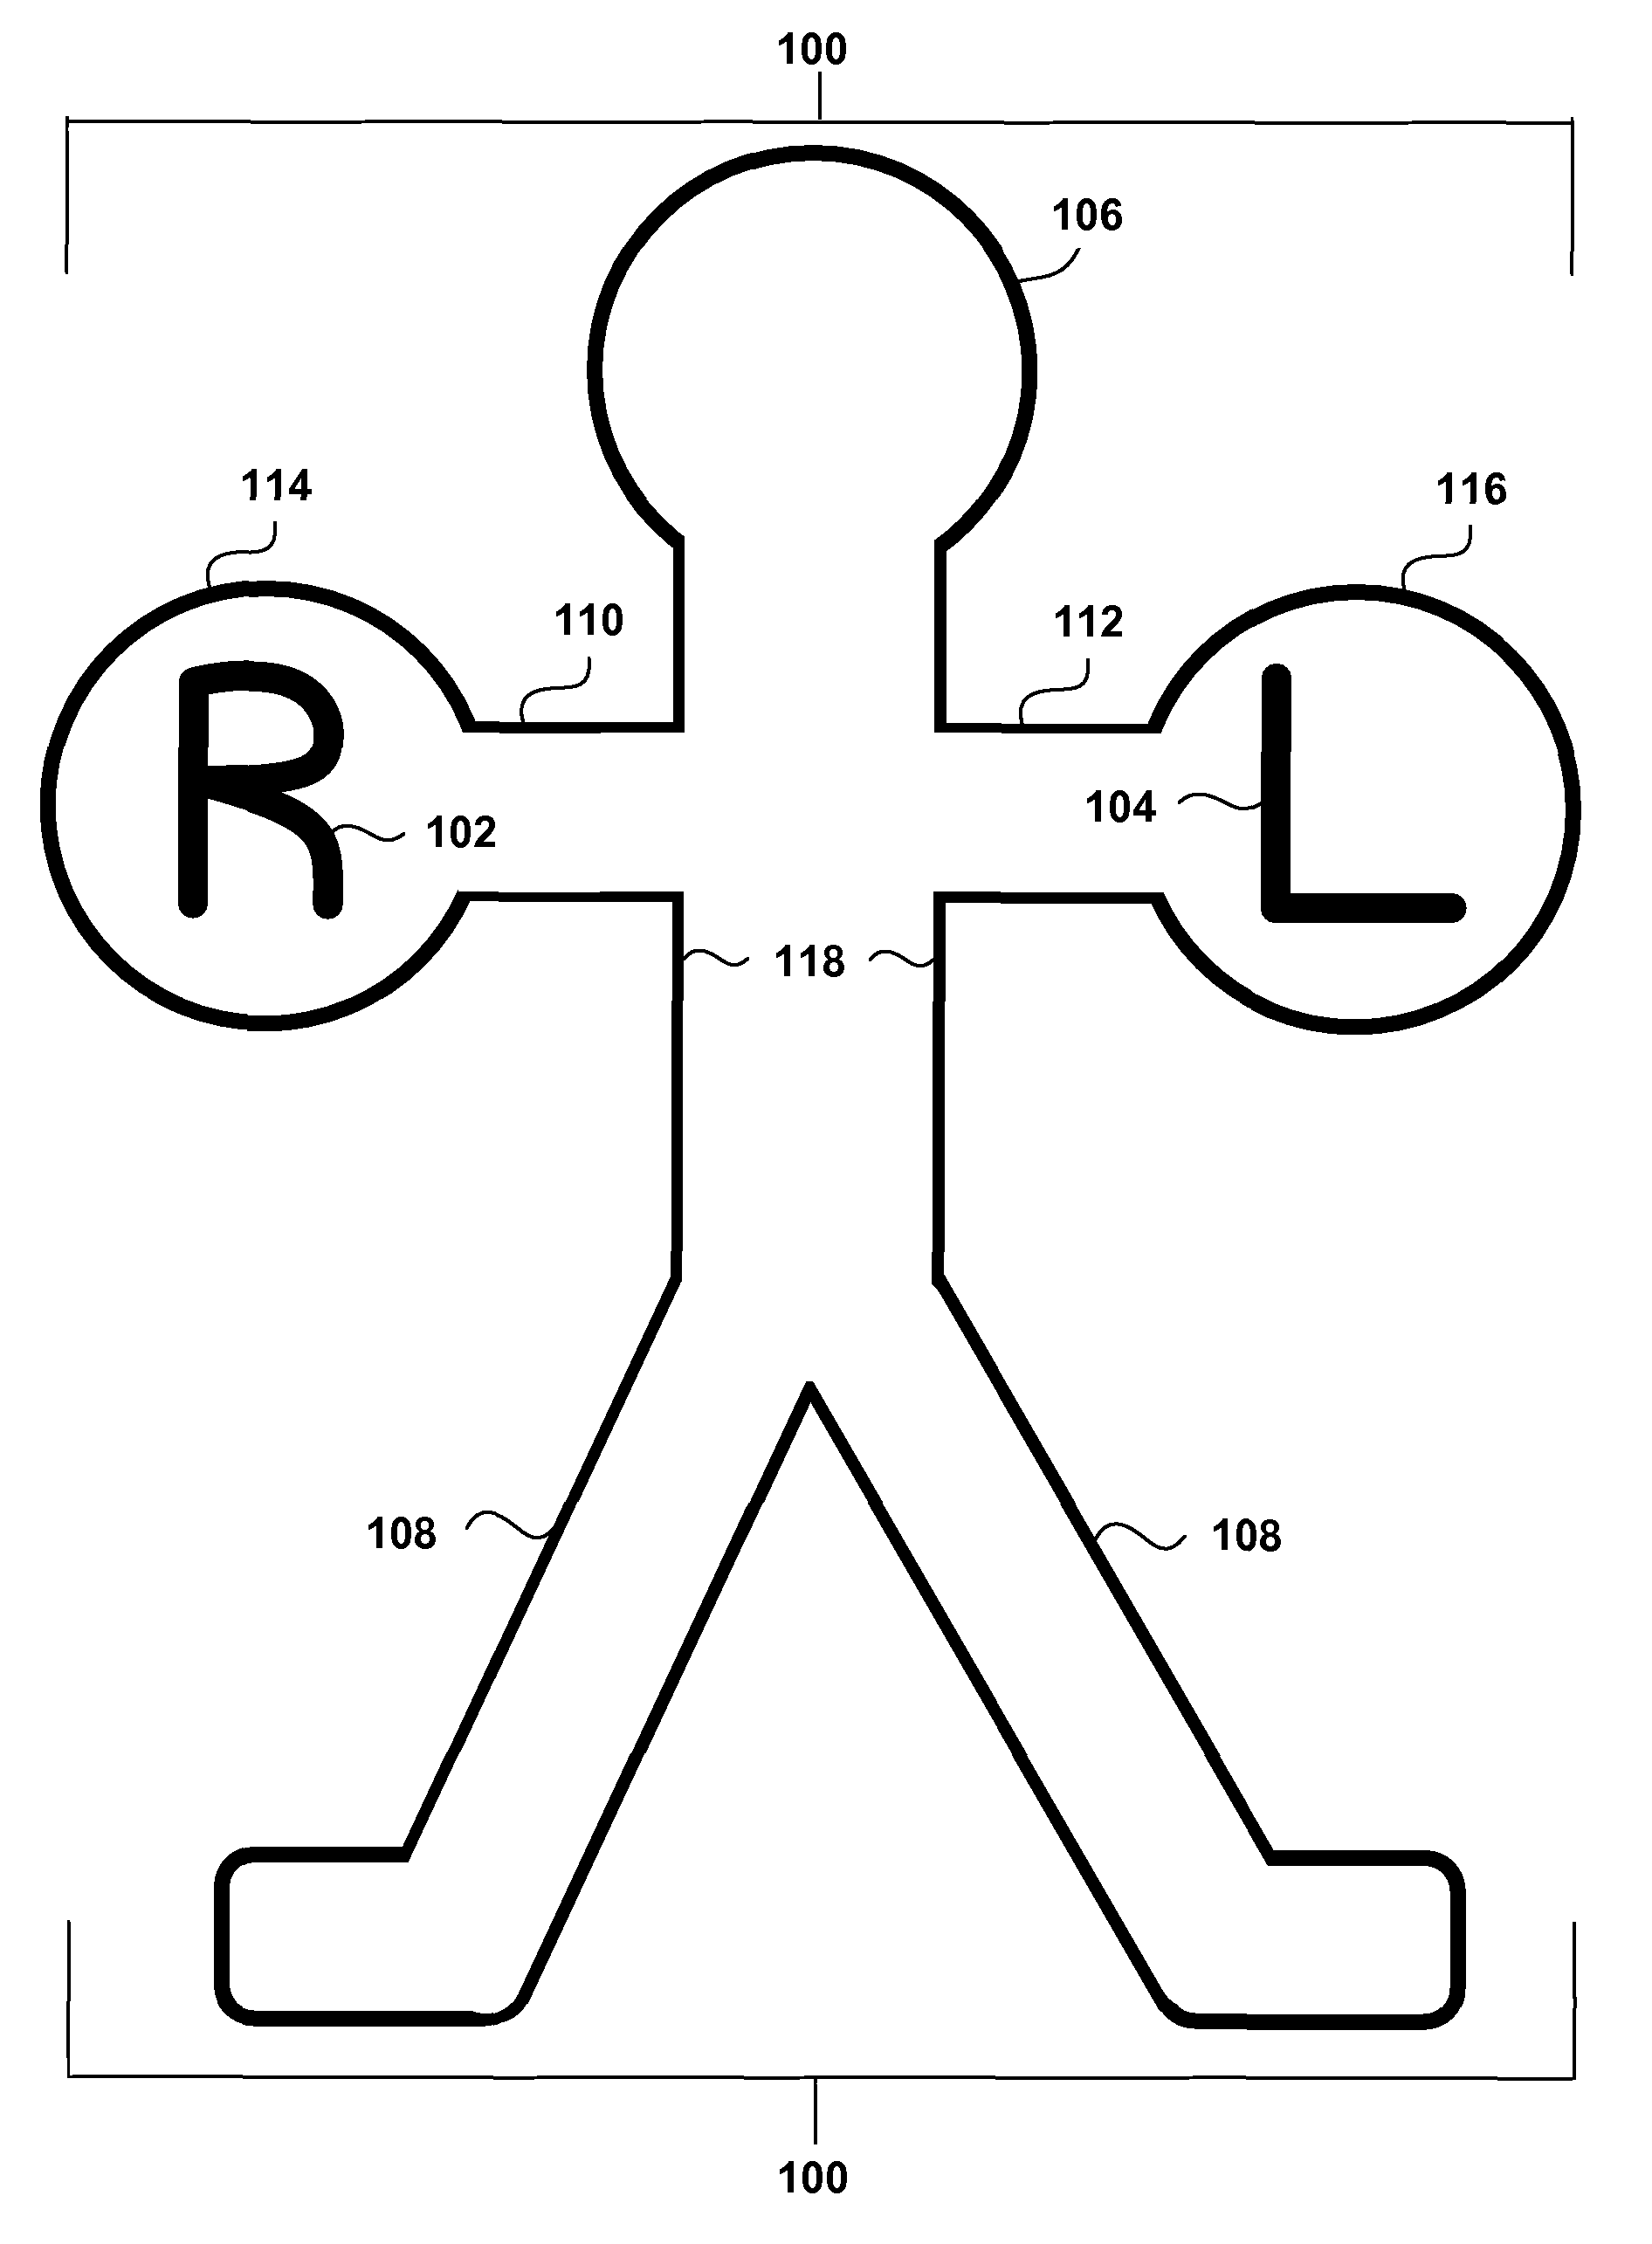 Anatomical marker for x-ray orientation